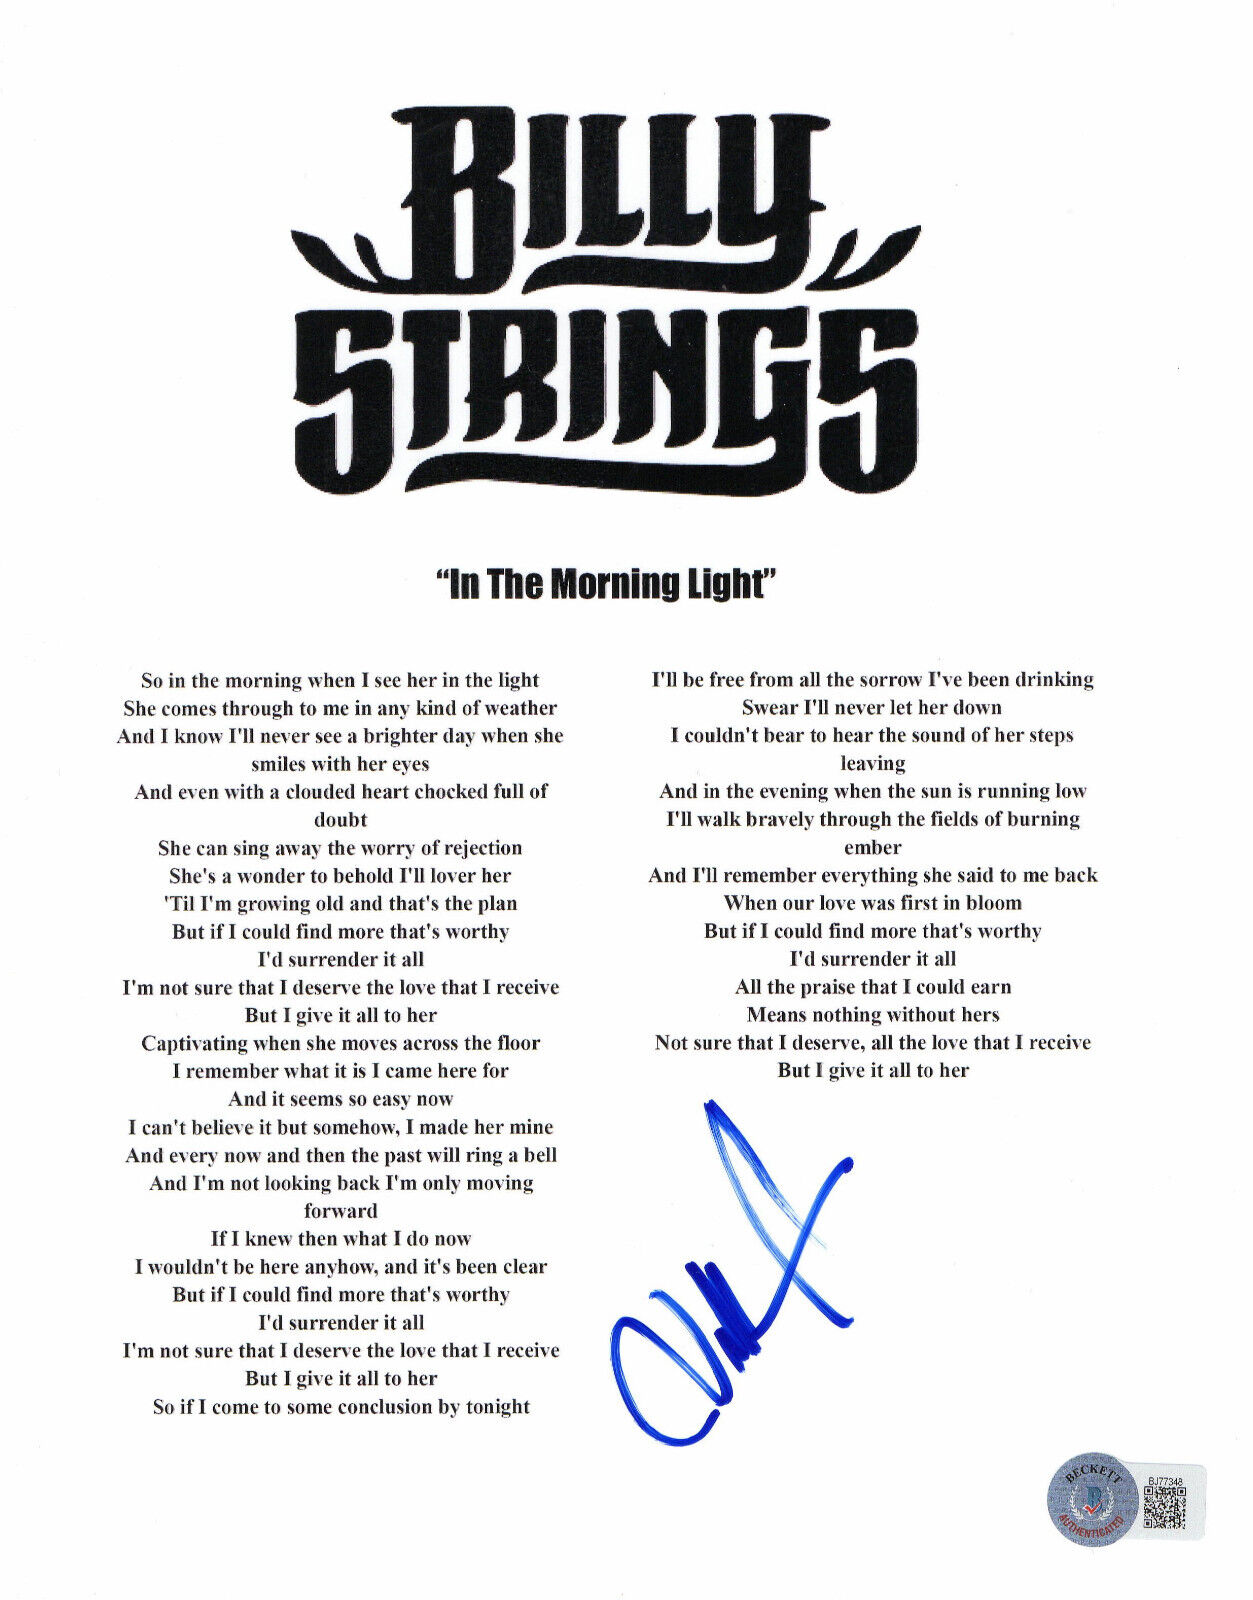 BILLY STRINGS SIGNED AUTOGRAPH I THE MORNING LIGHT MUSIC SHEET BECKETT BAS CHIC